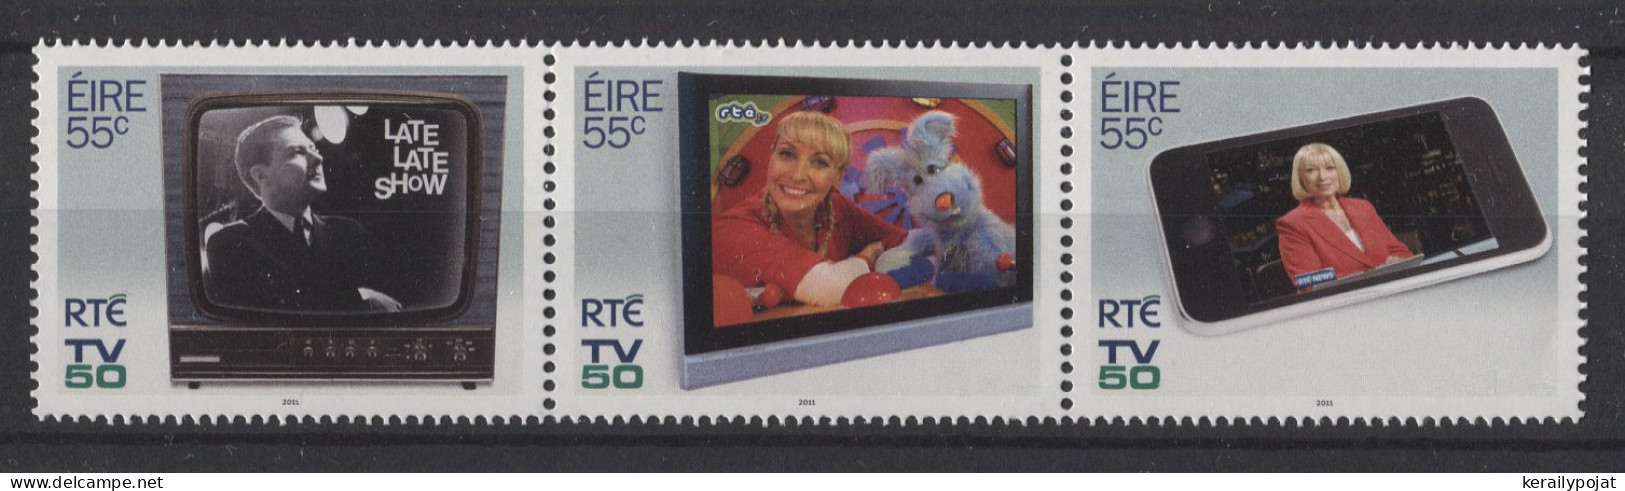 Ireland - 2011 State Television Station Strip MNH__(TH-26277) - Unused Stamps